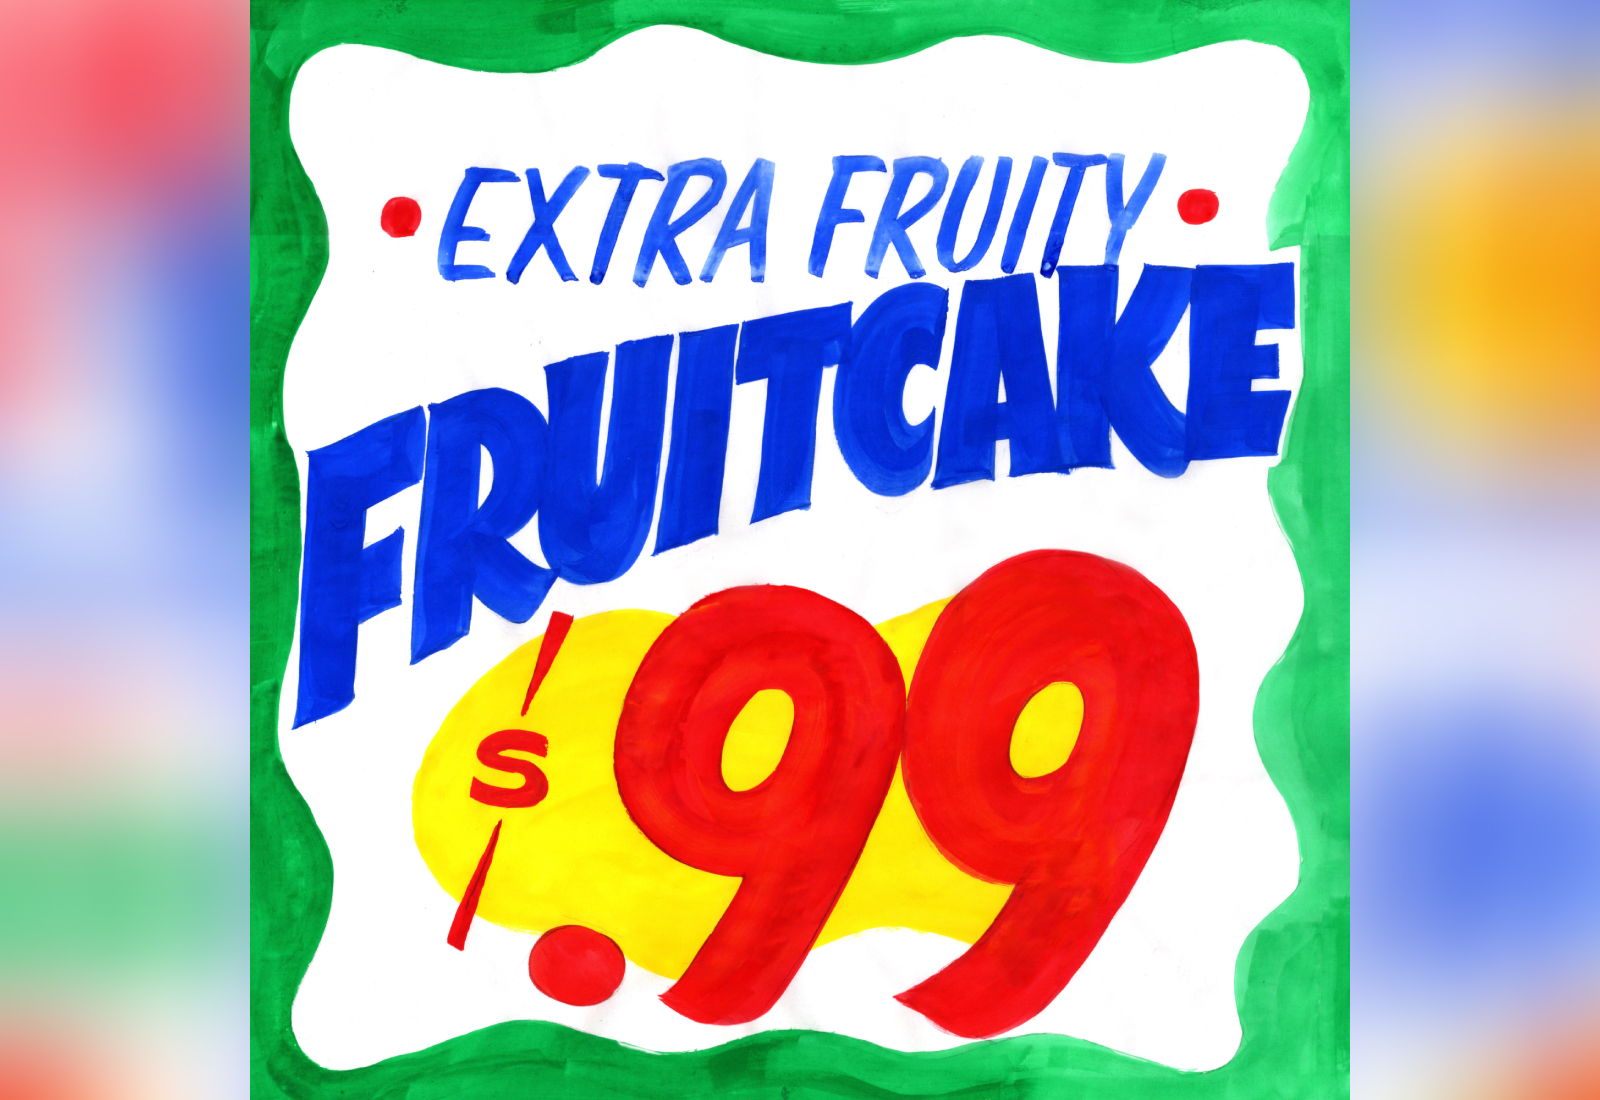 Extra Fruity Fruitcake - Fake Grocery Store Sign | Hand Painted Sign by Joey Carty